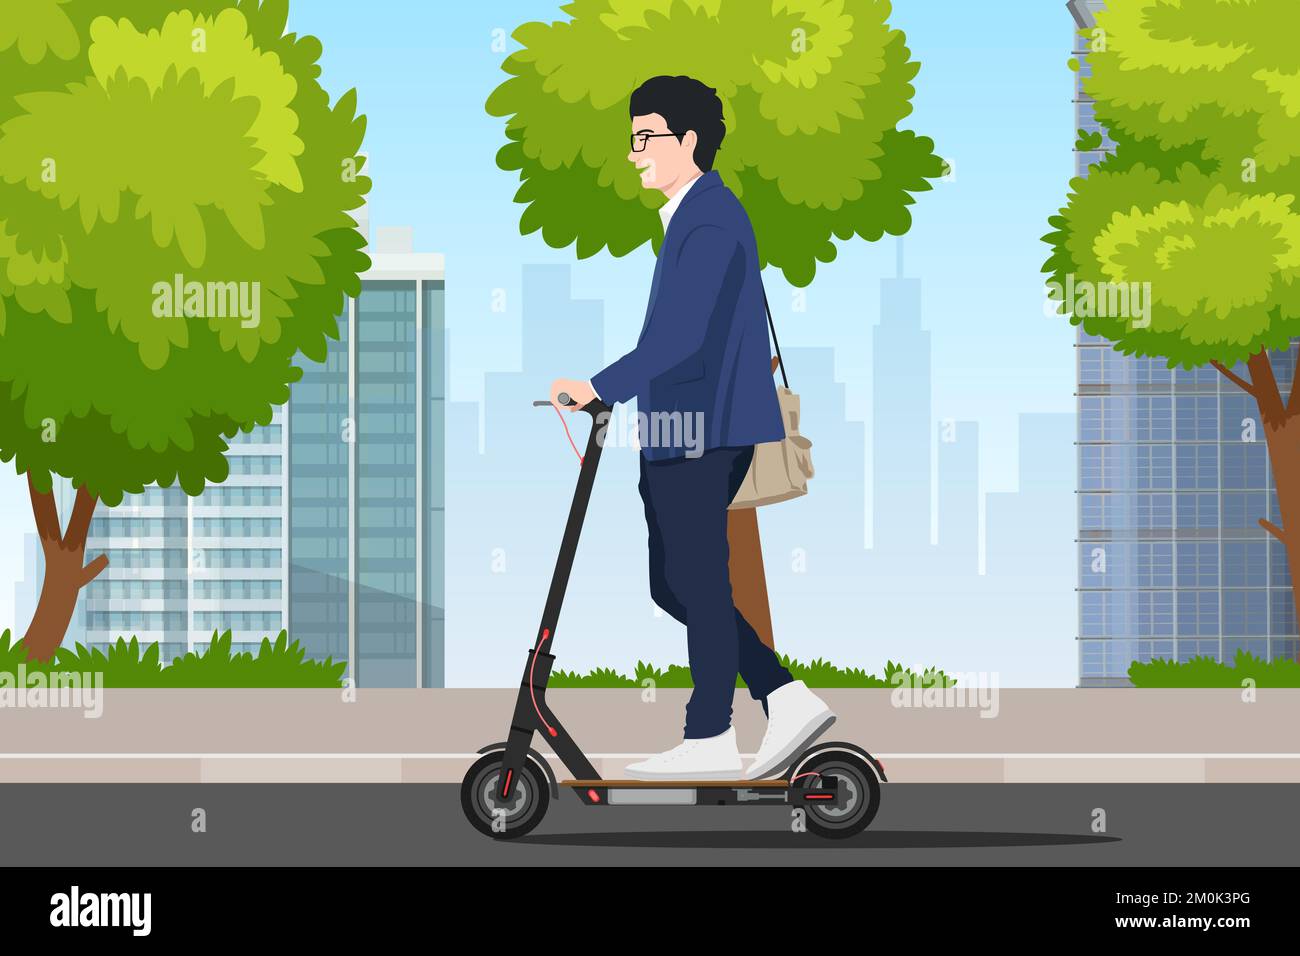 young asian business person commuting by push scooter in city Stock Vector